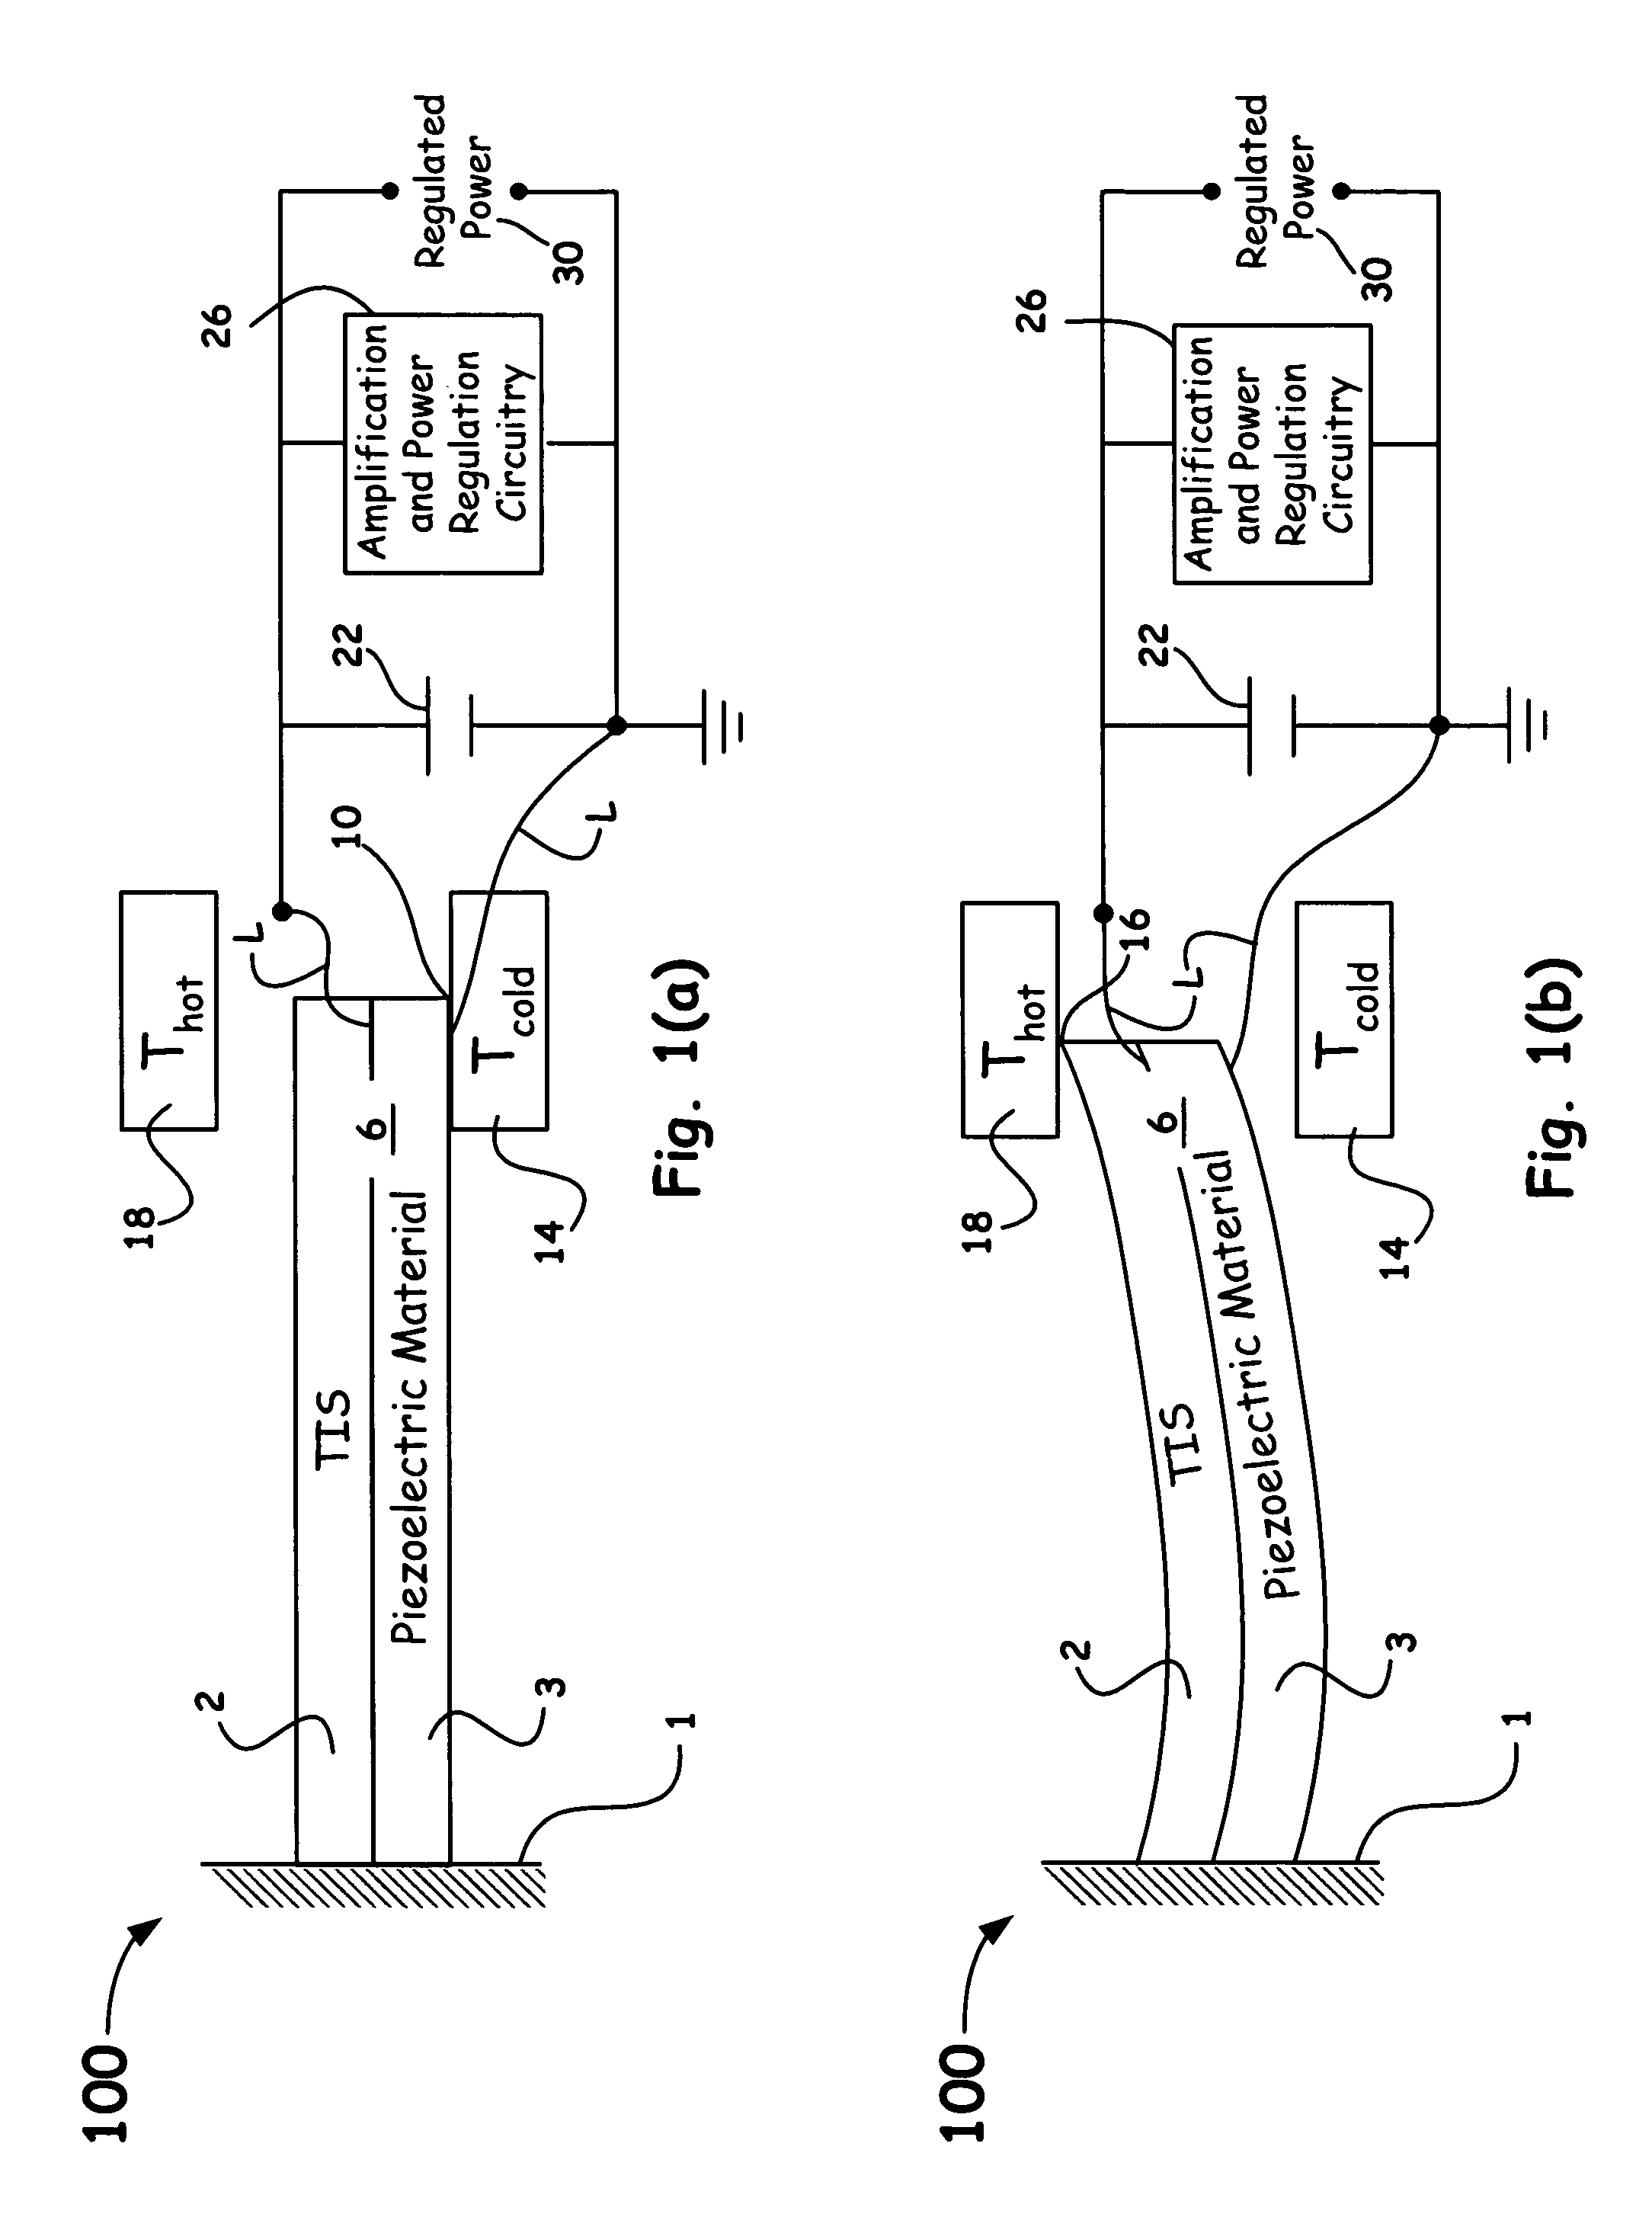 Energy harvesting using a thermoelectric material